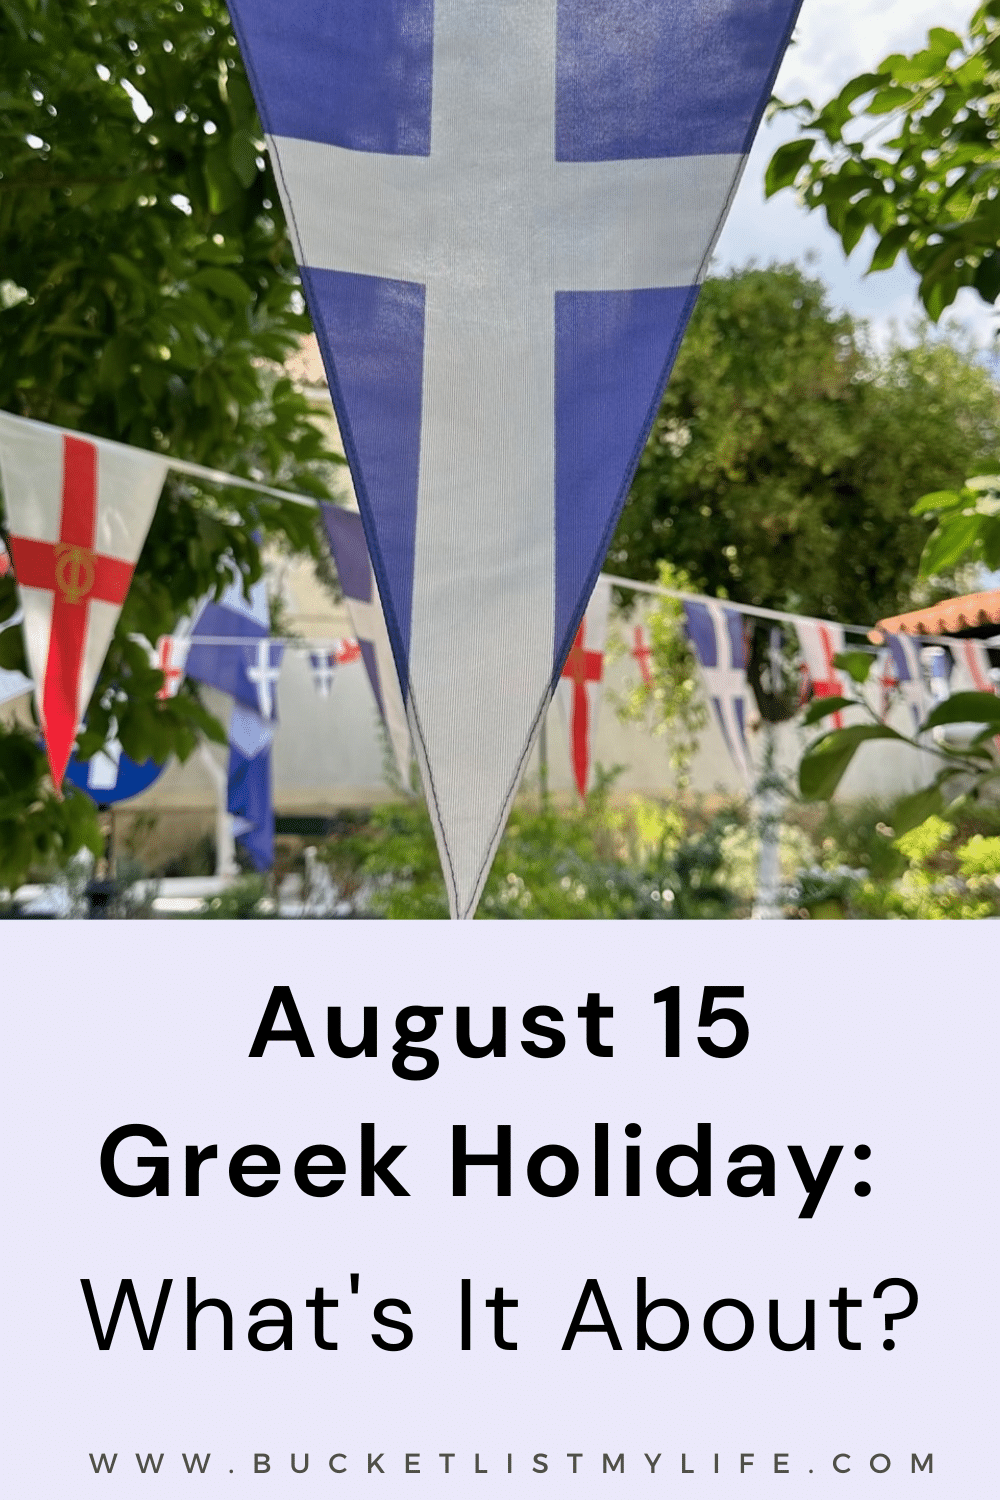 August 15 Greek Holiday: What Is the Celebration?